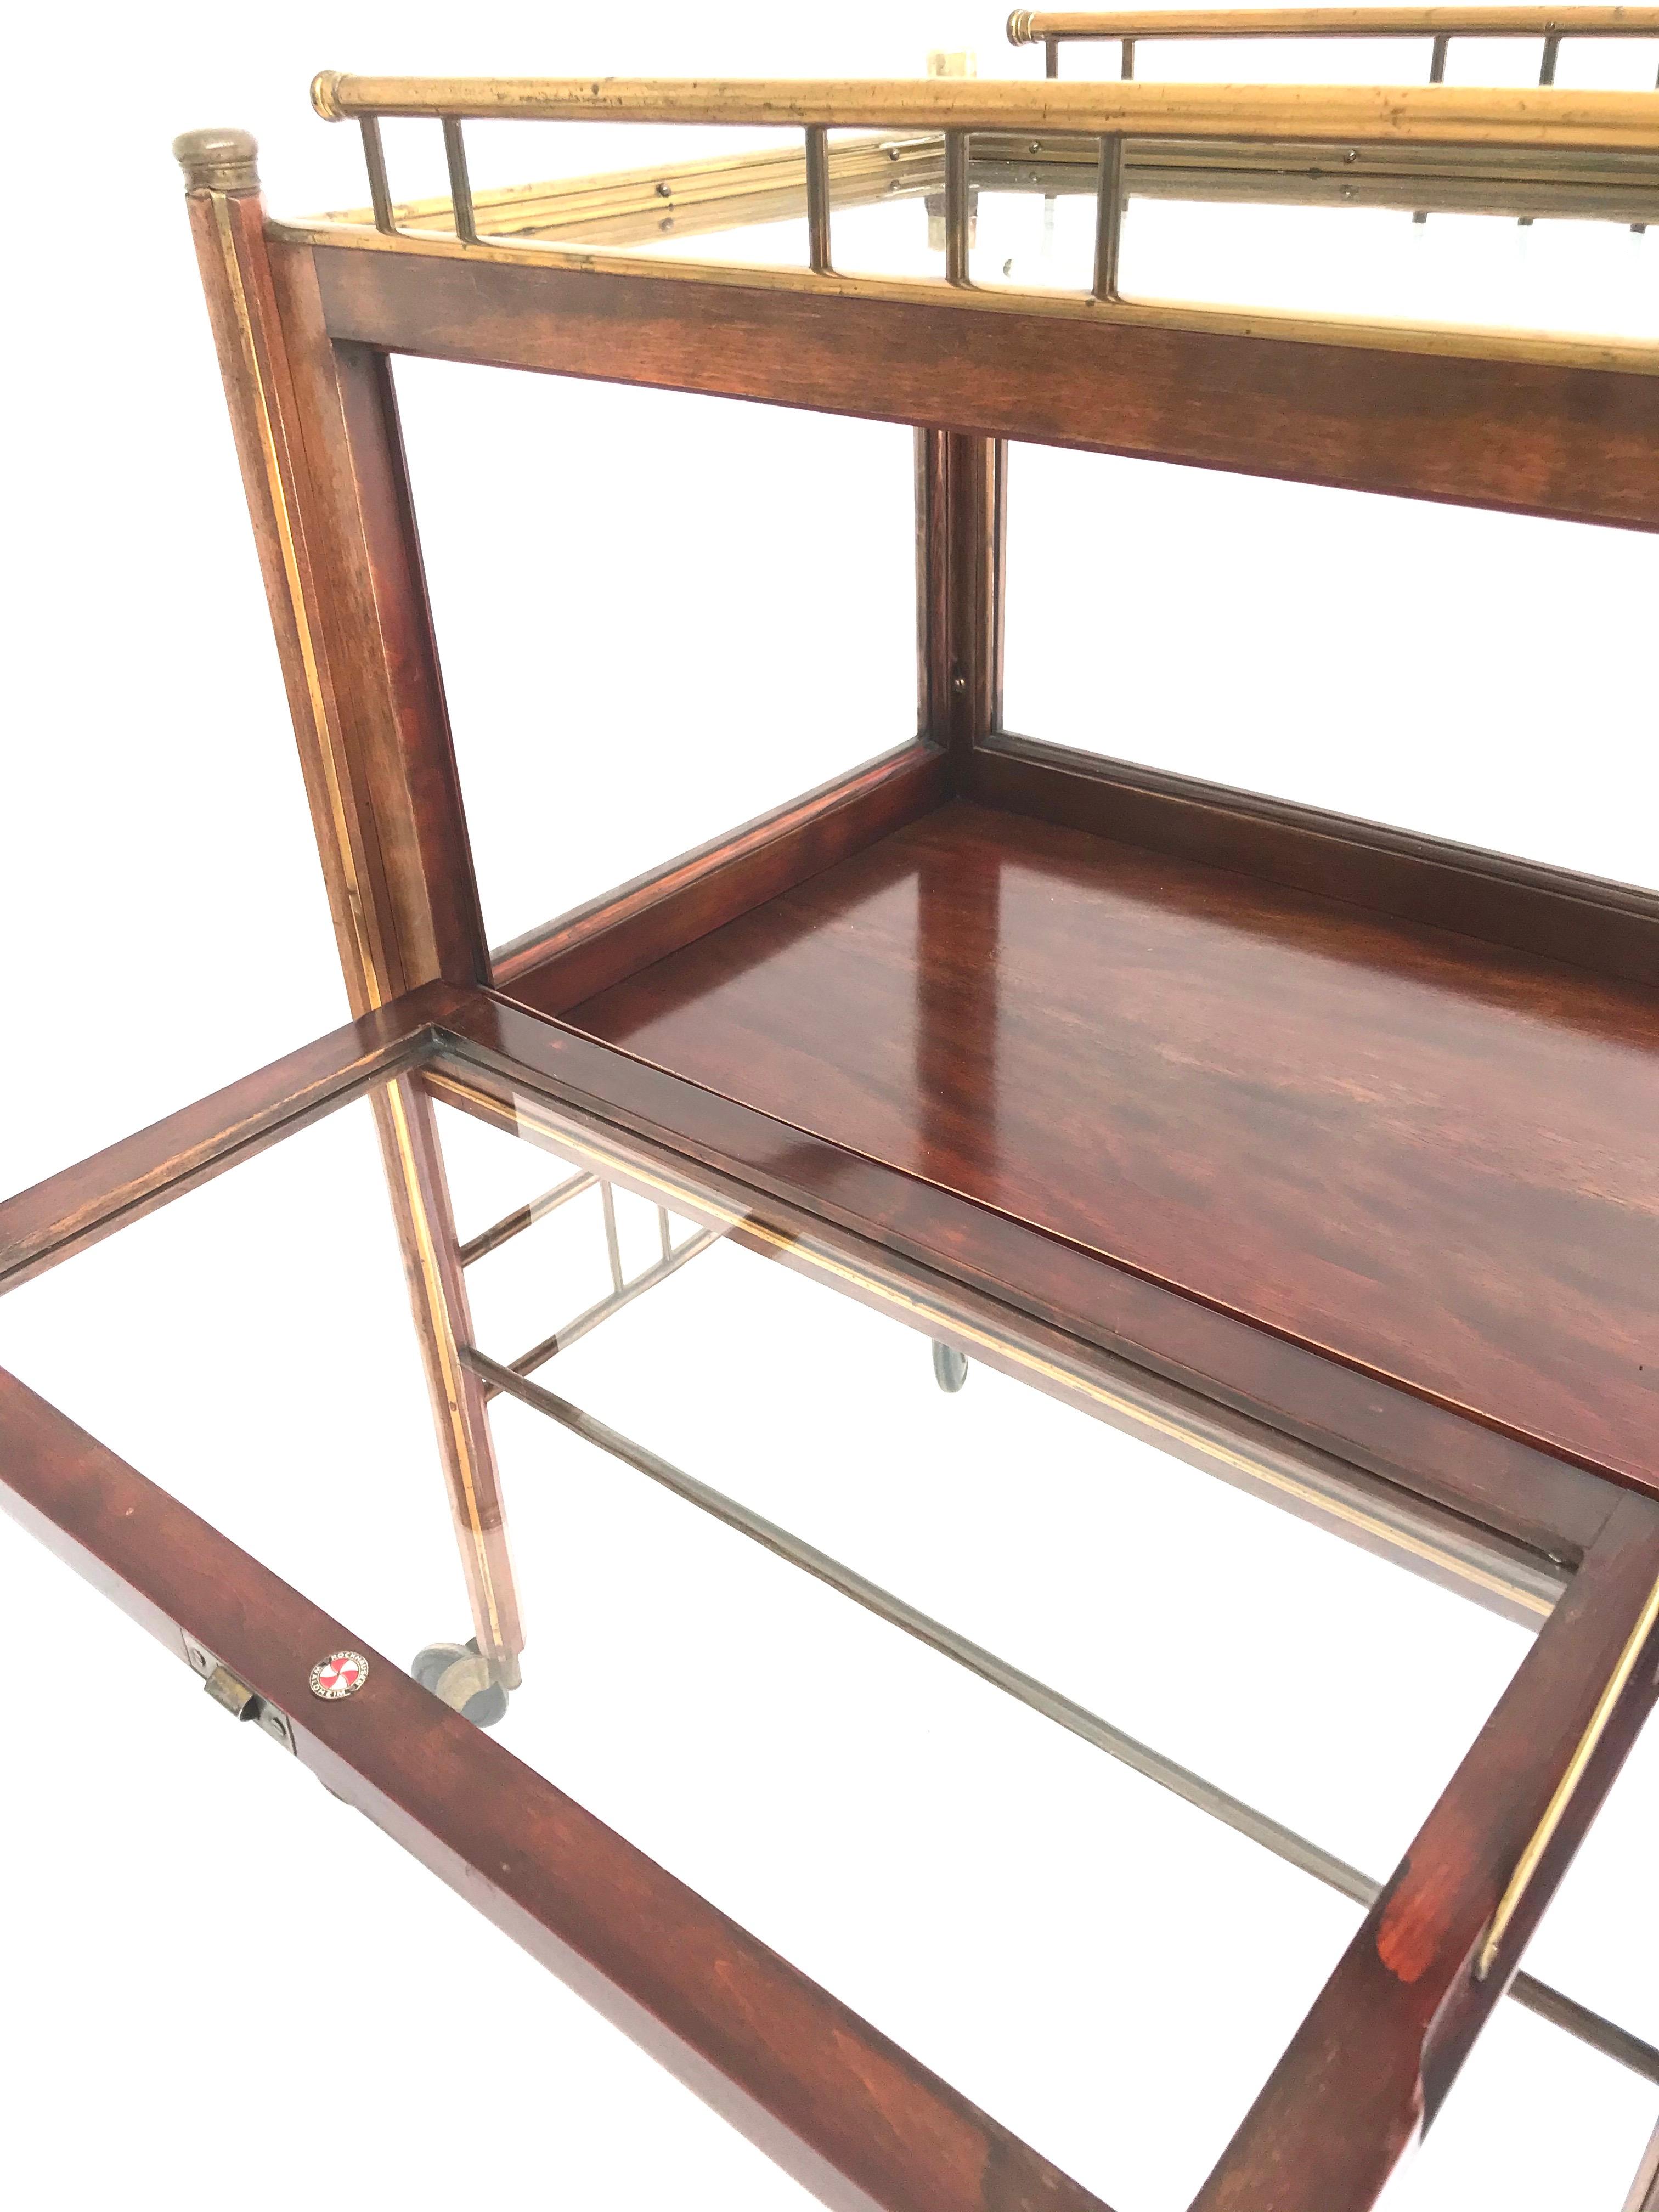 Hand-Crafted Stunning Asymmetrical Arts & Crafts Wood, Brass & Glass Drinks Trolley or Cart For Sale